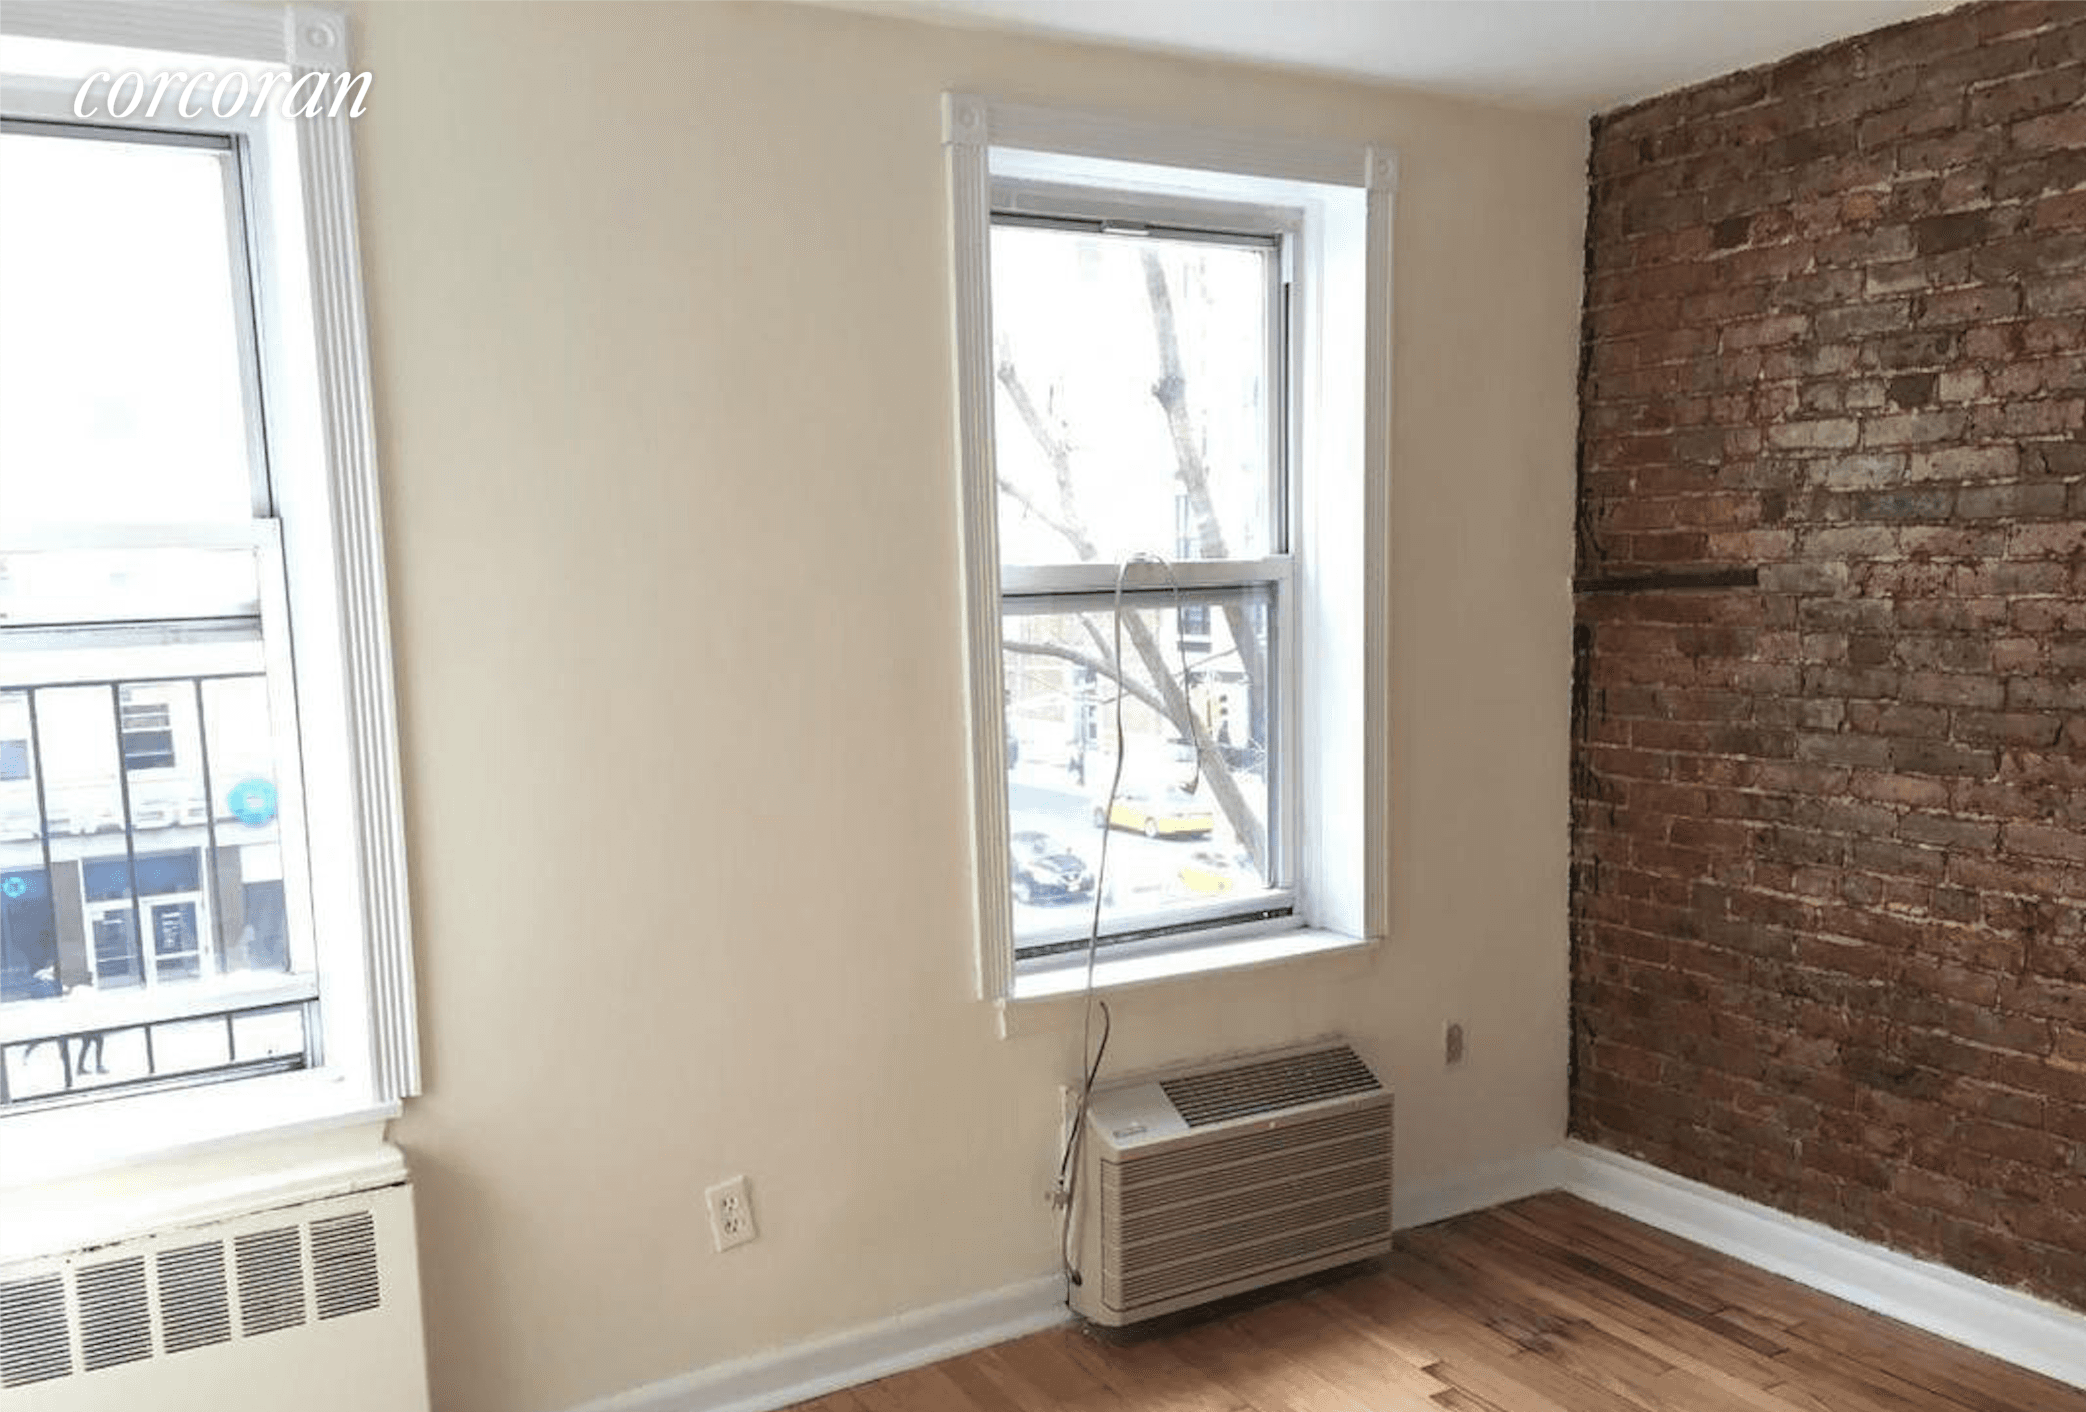 Amazing two bedroom in the heart of the Upper East Side at 79th and 3rd, which features Totally renovated Fantastic closet space Exposed brick Amazing location close to everything grocery ...